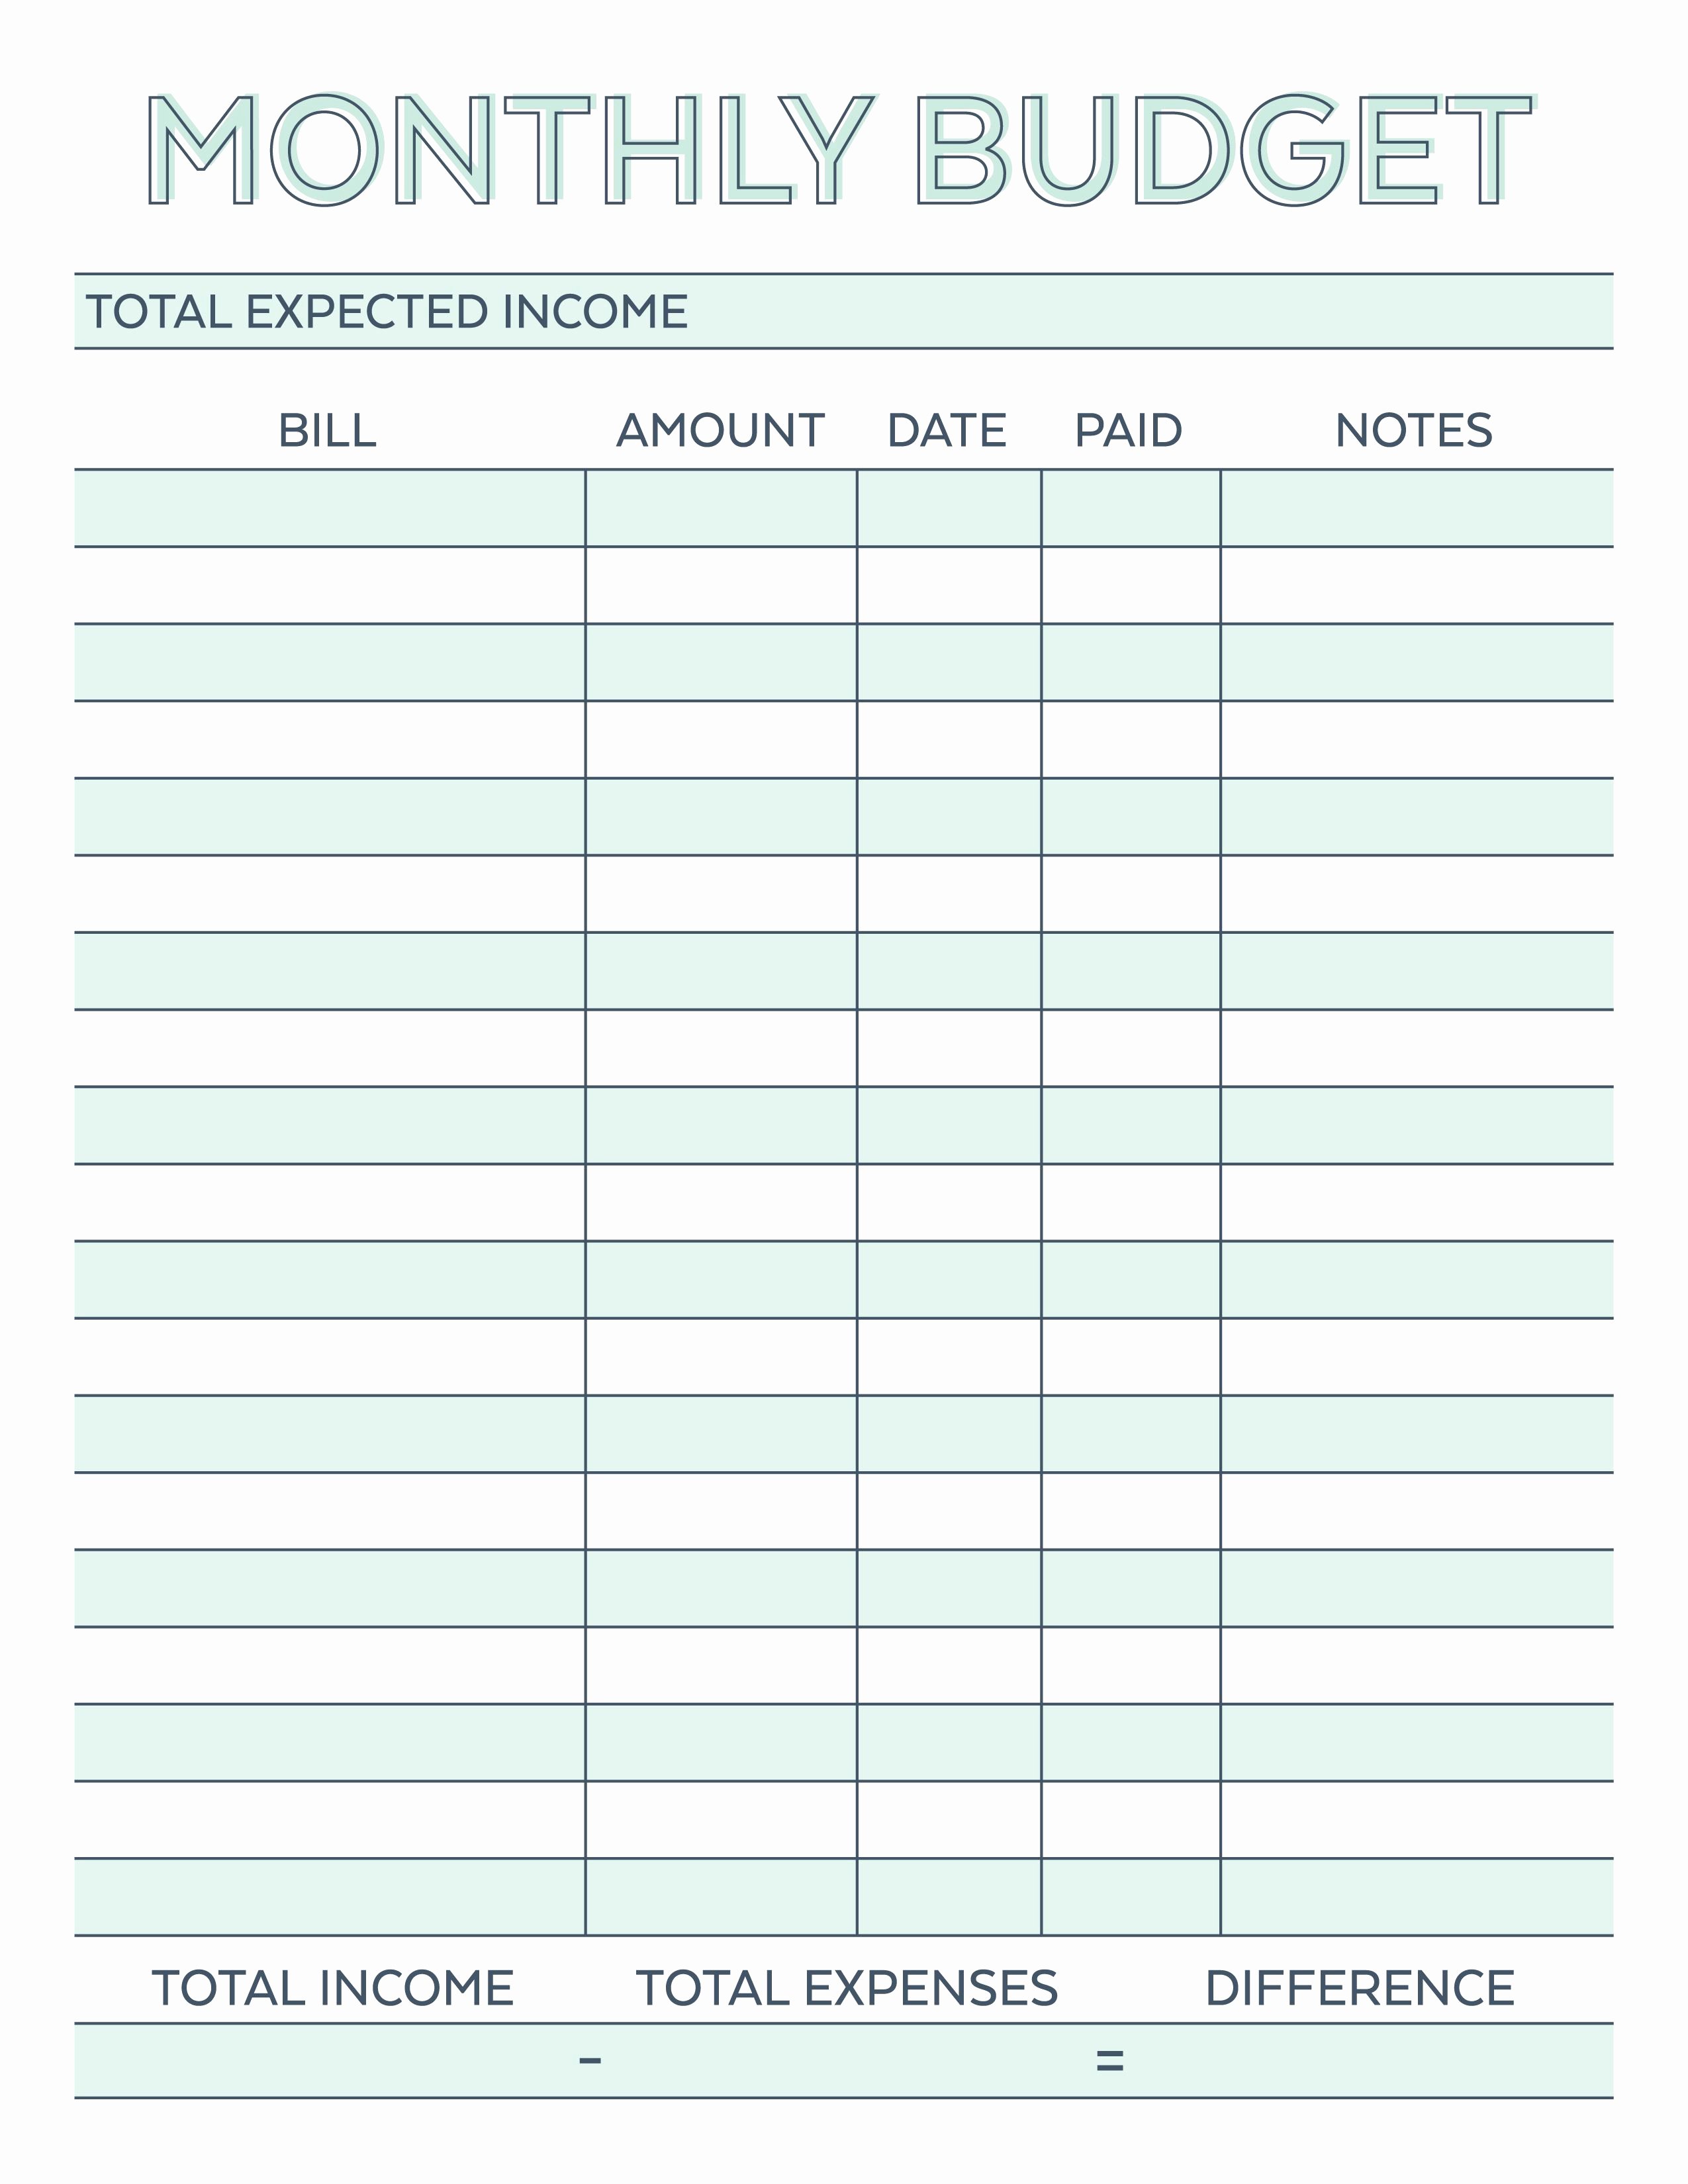 Monthly Budget Worksheet Excel Beautiful Pin by Melody Vliem On Printables